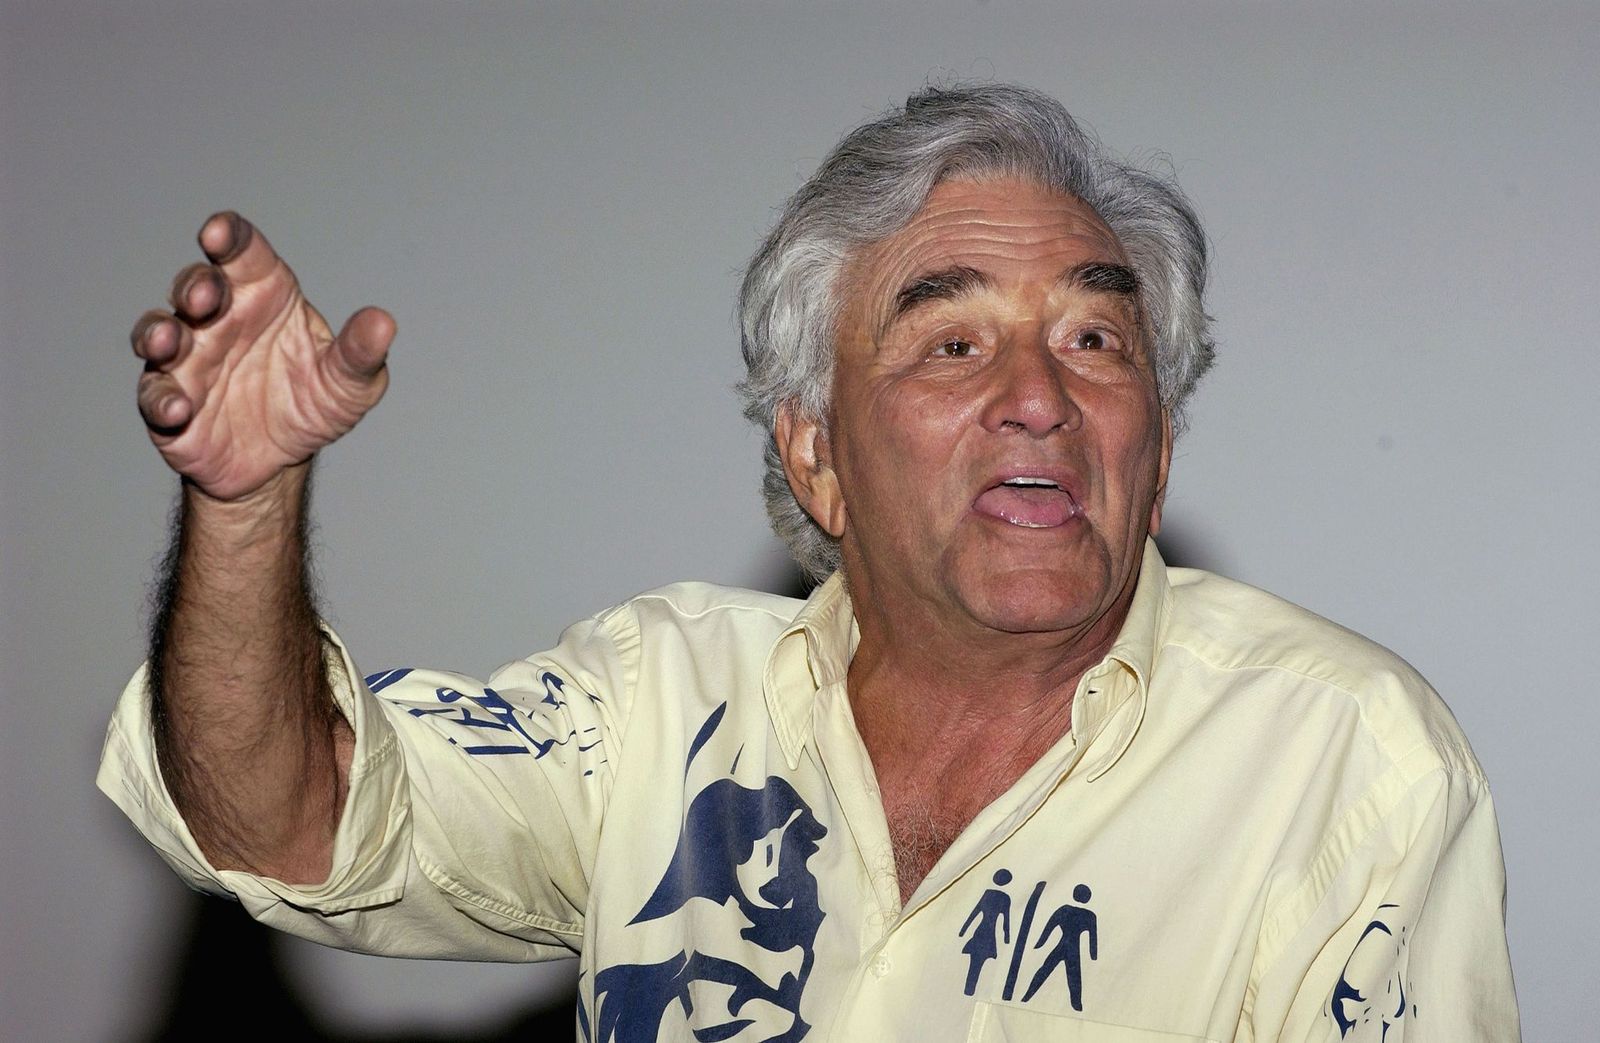 Peter Falk during a 2005 question and answer session in Arclight Theaters. | Photo: Getty Images